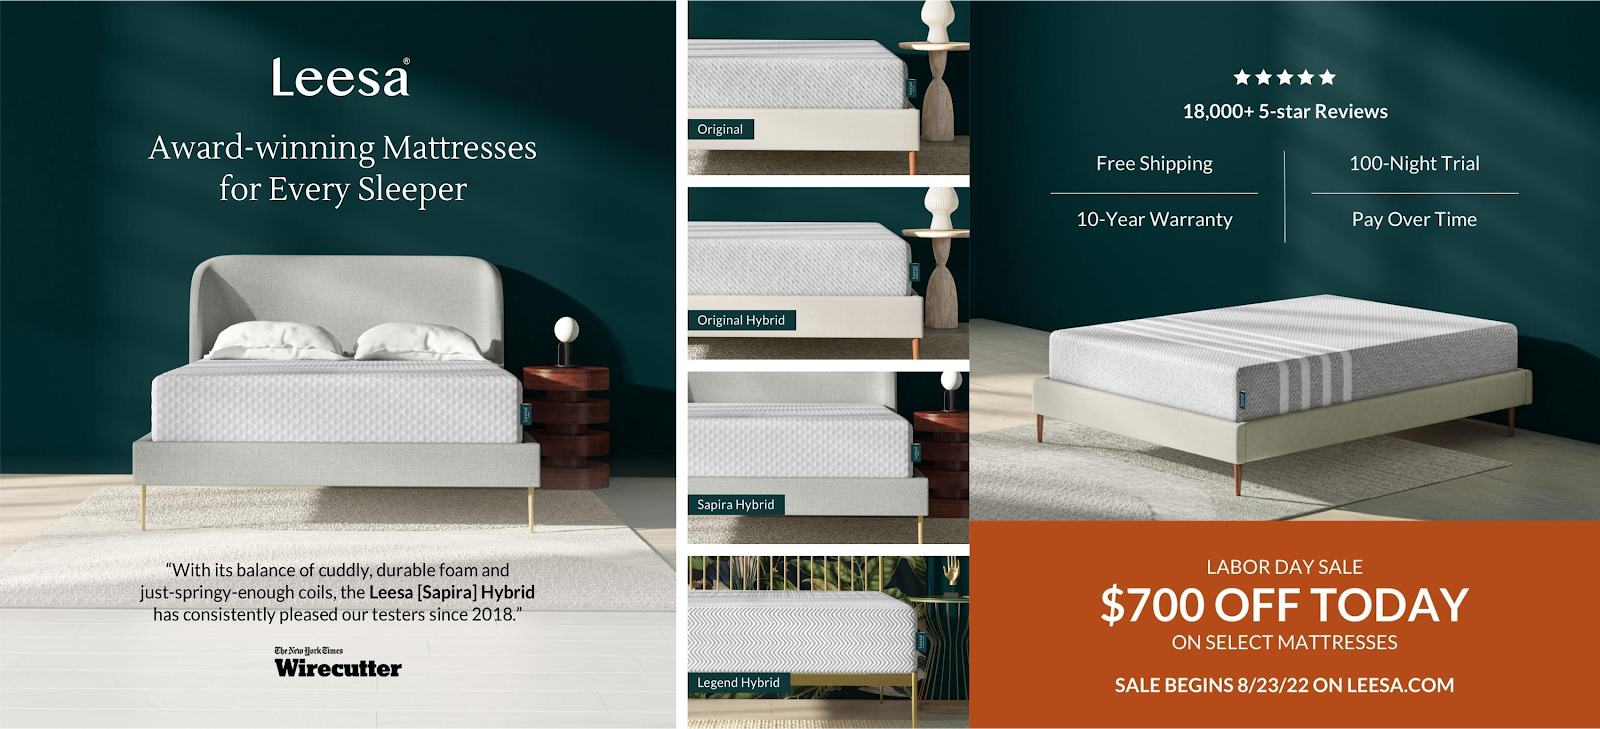 Creative for marketing postcard of mattresses on bed frames promoting labor day sales